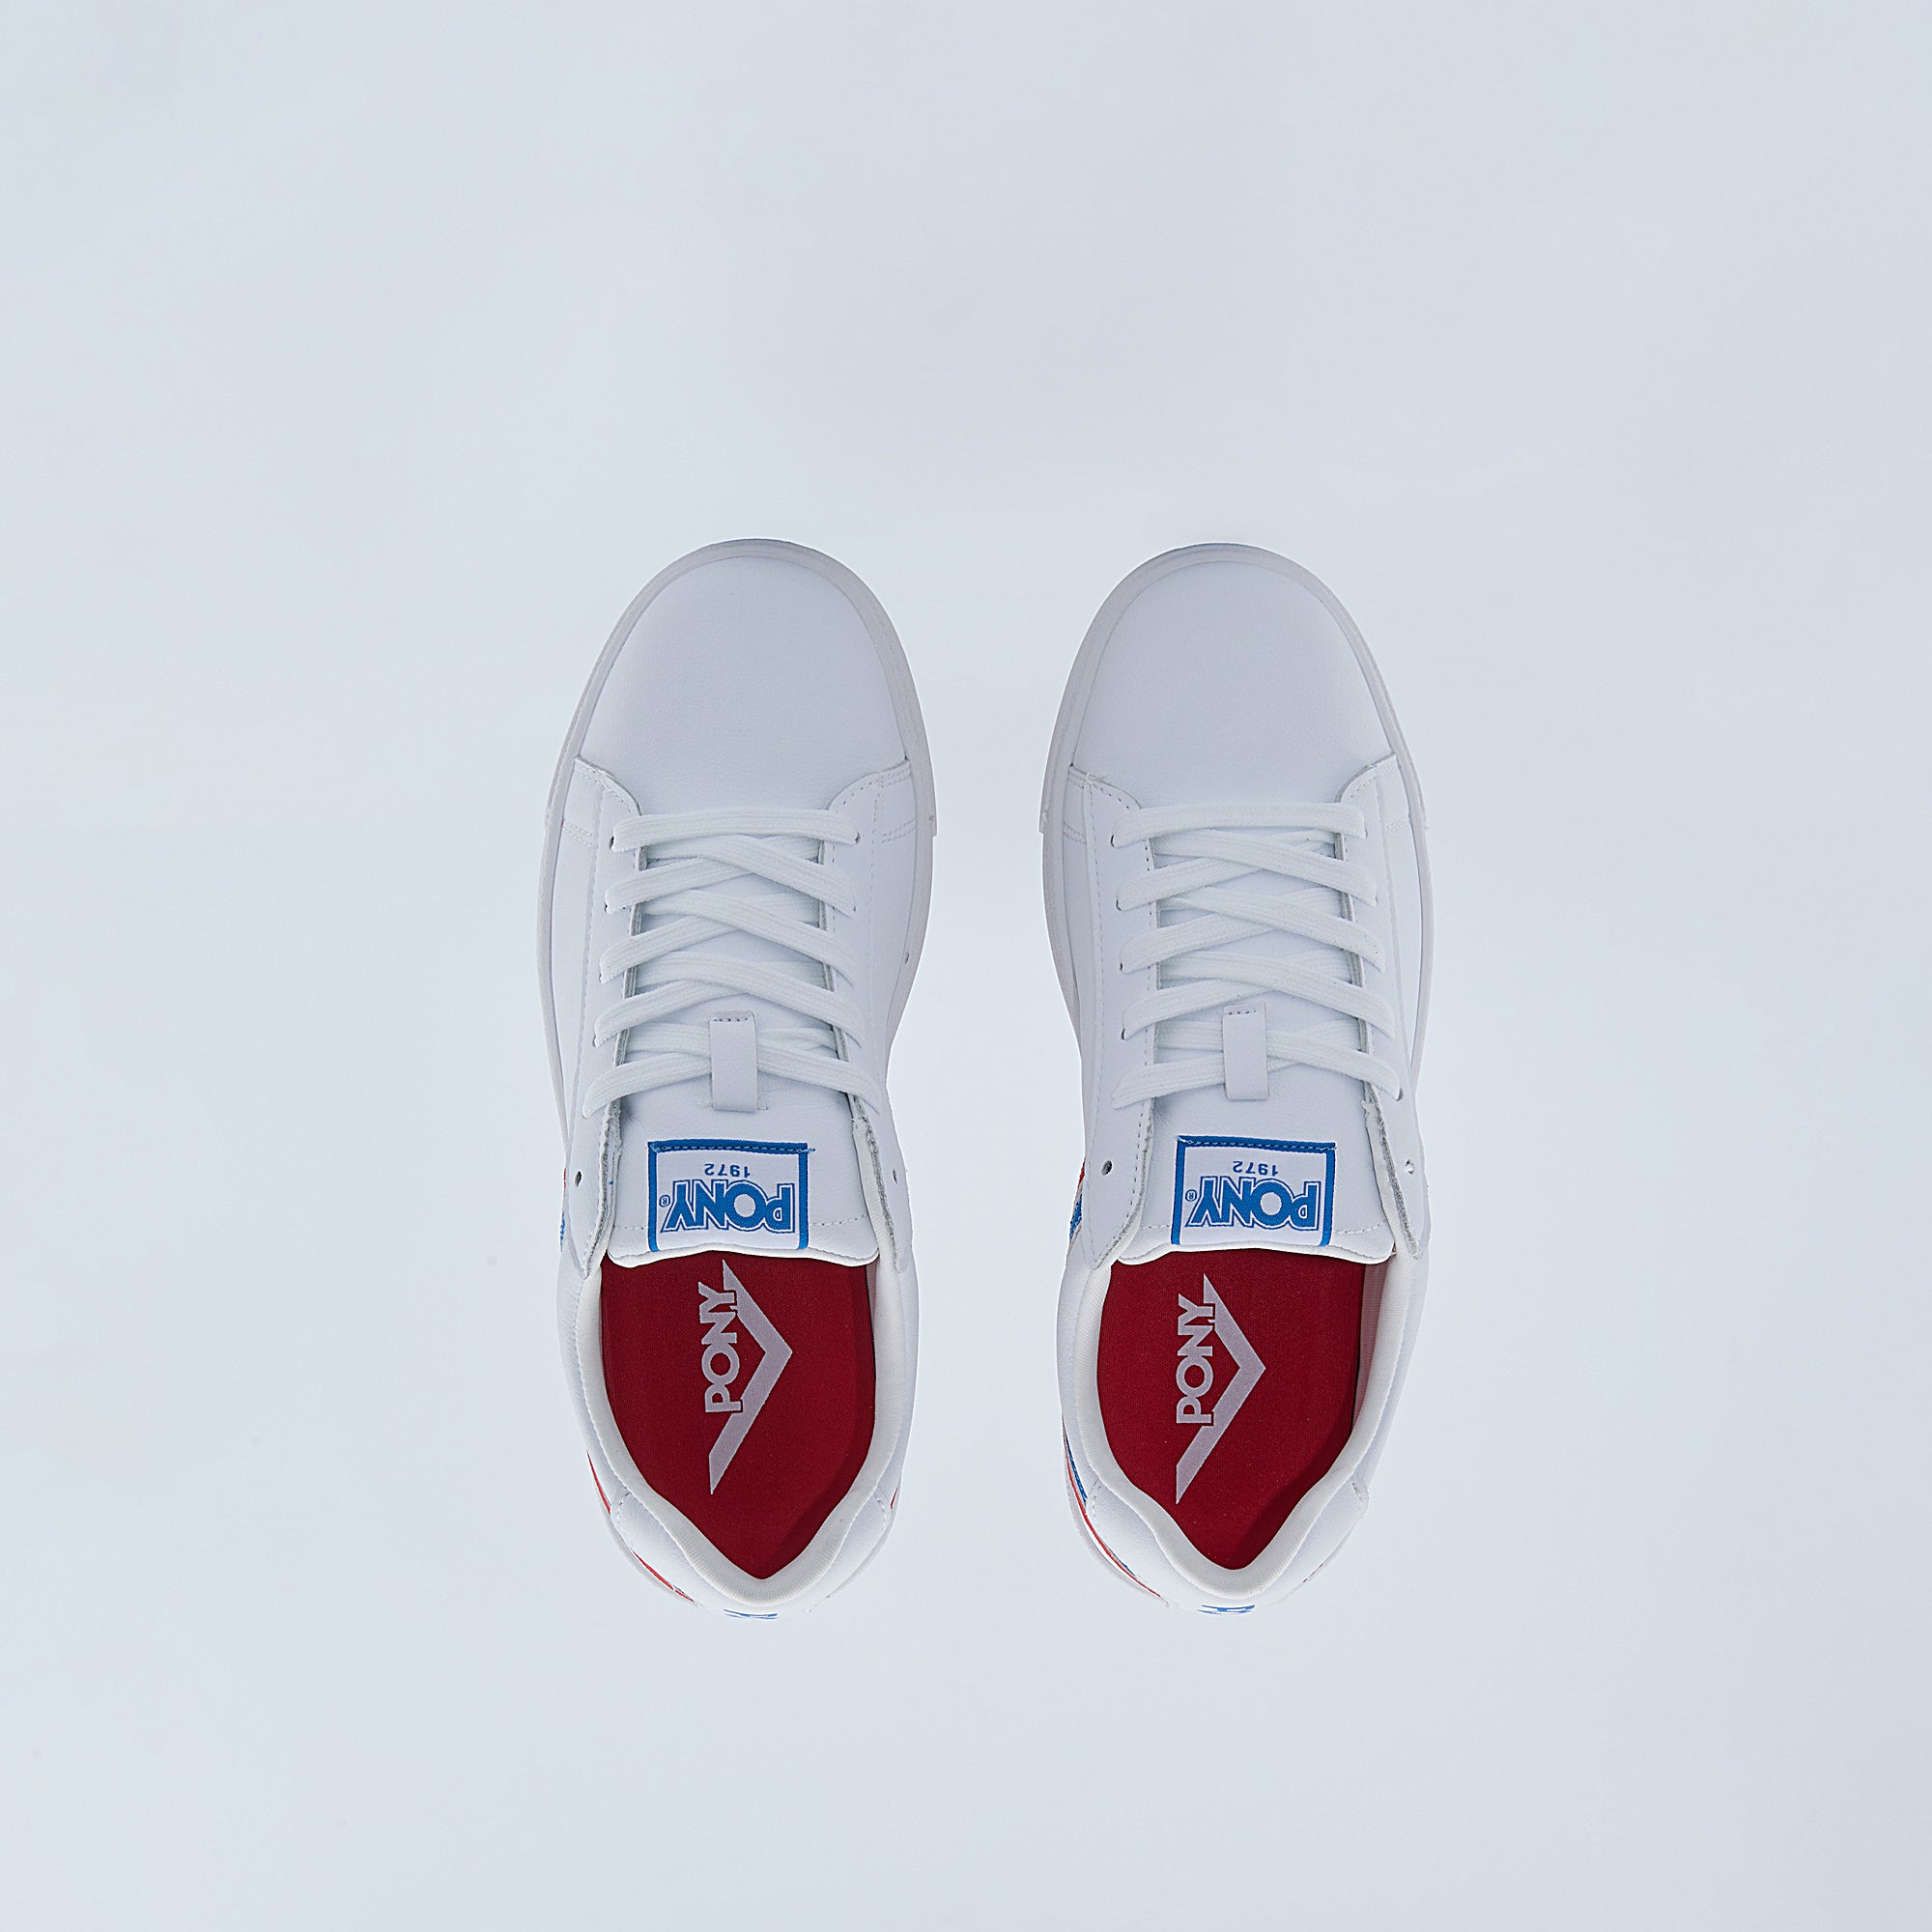 Pony Men's Racer Sneakers with White Main Lace France